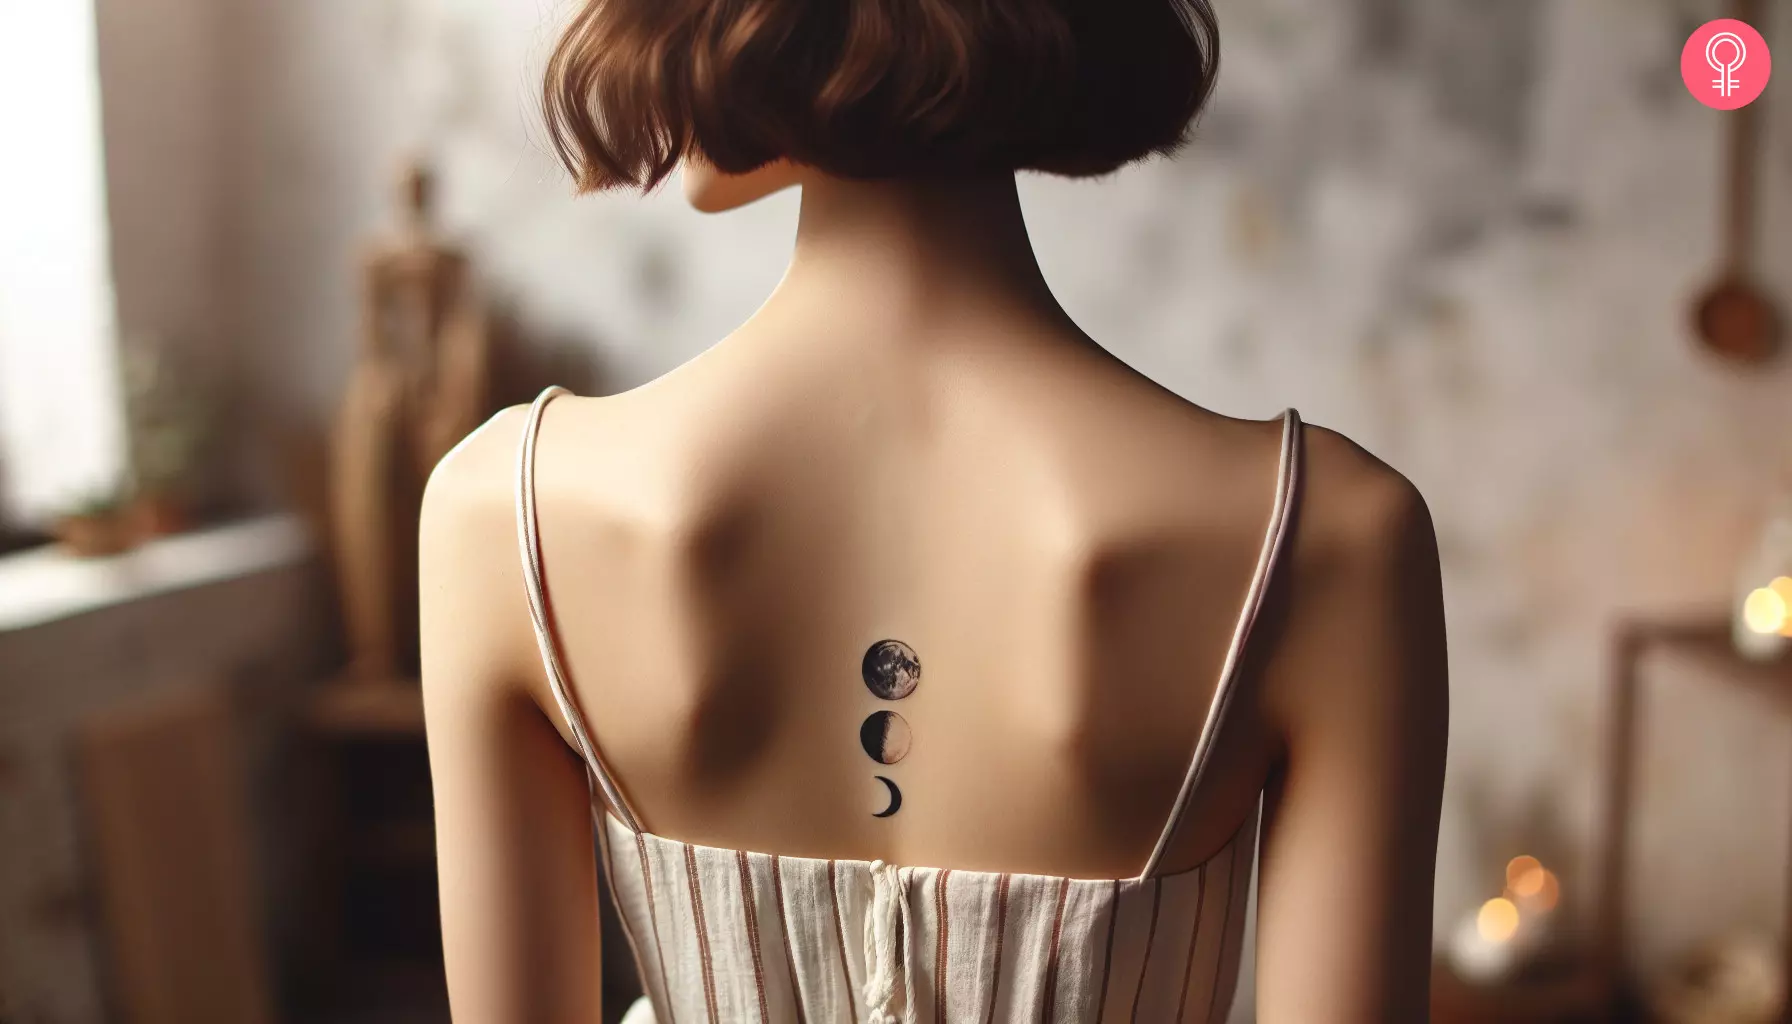 Moon phases spine tattoo